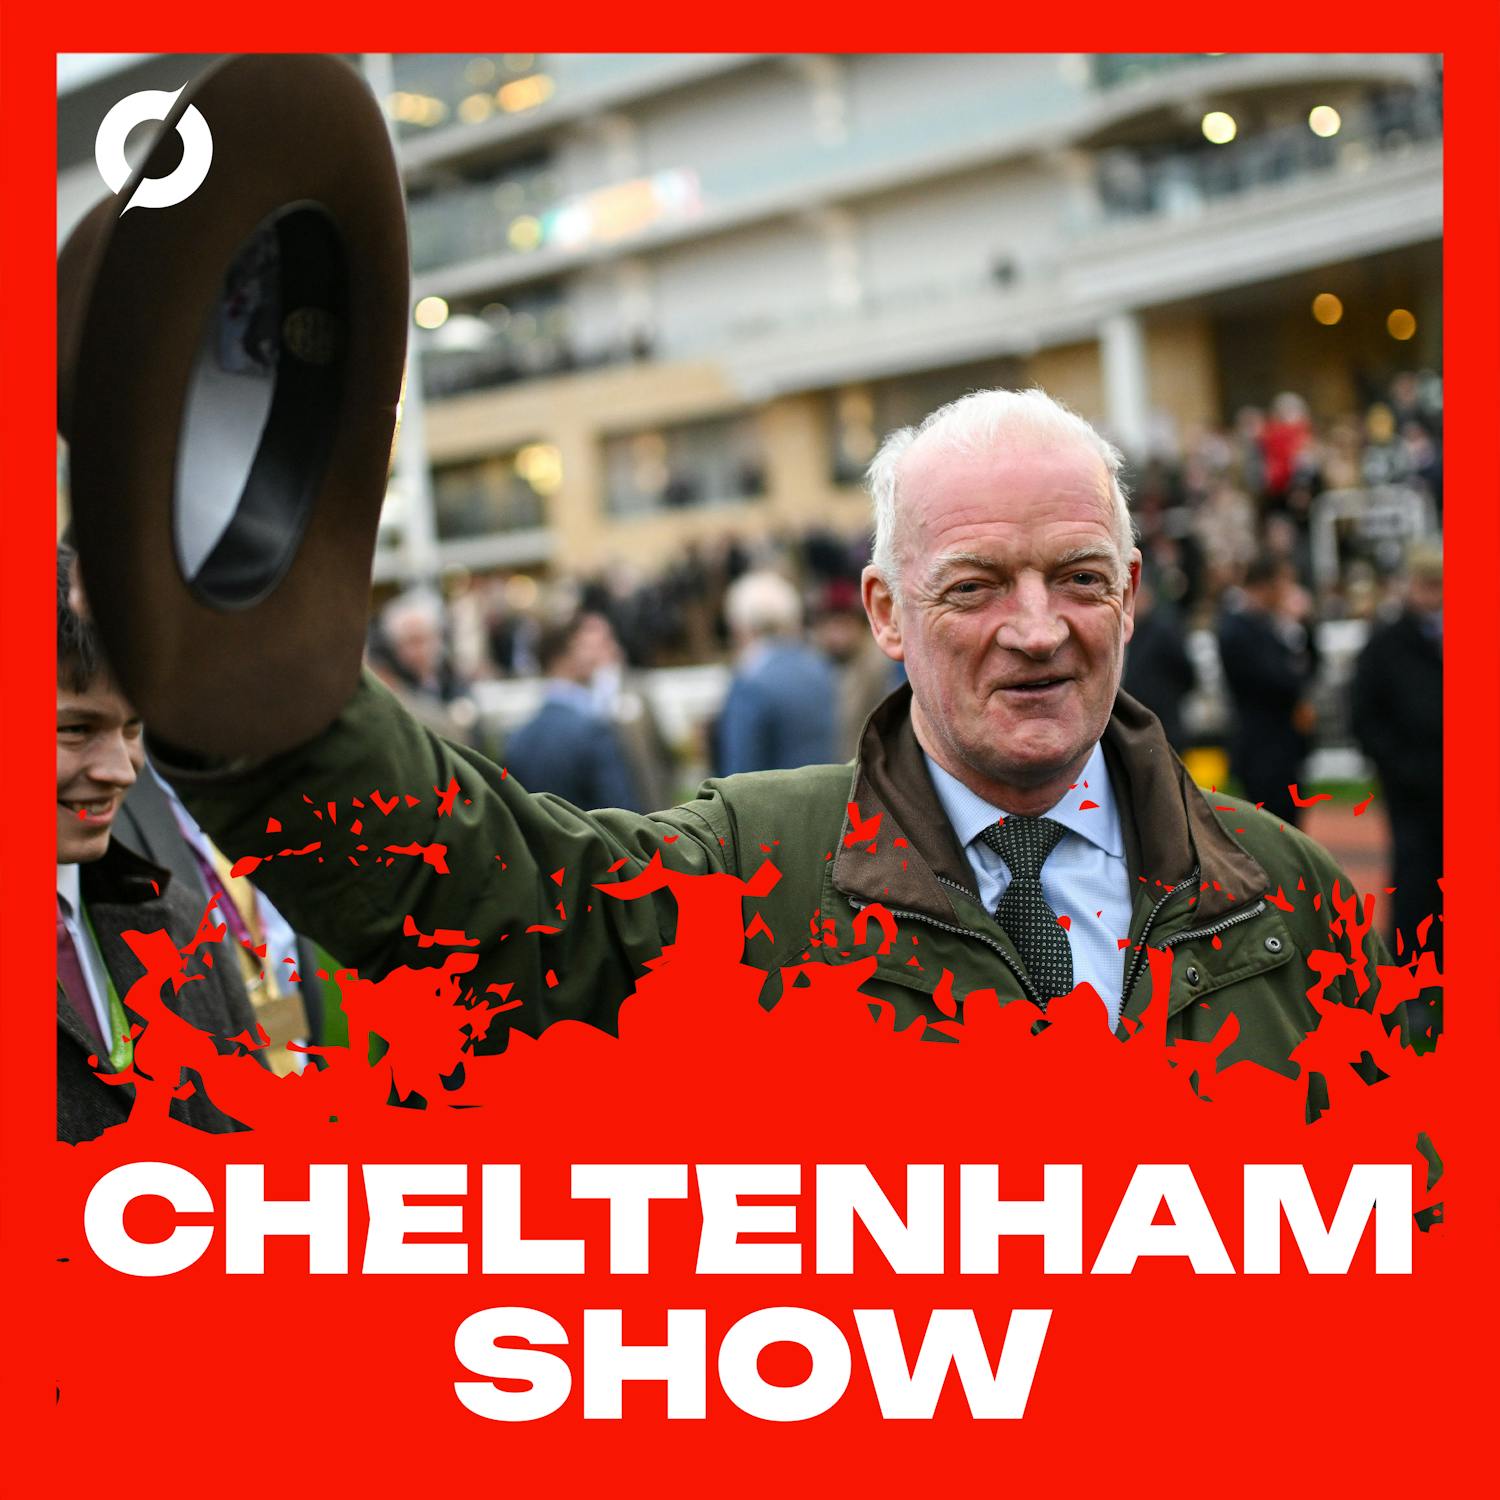 THE CHELTENHAM SHOW | Gold Cup Friday, football fever & final day picks!